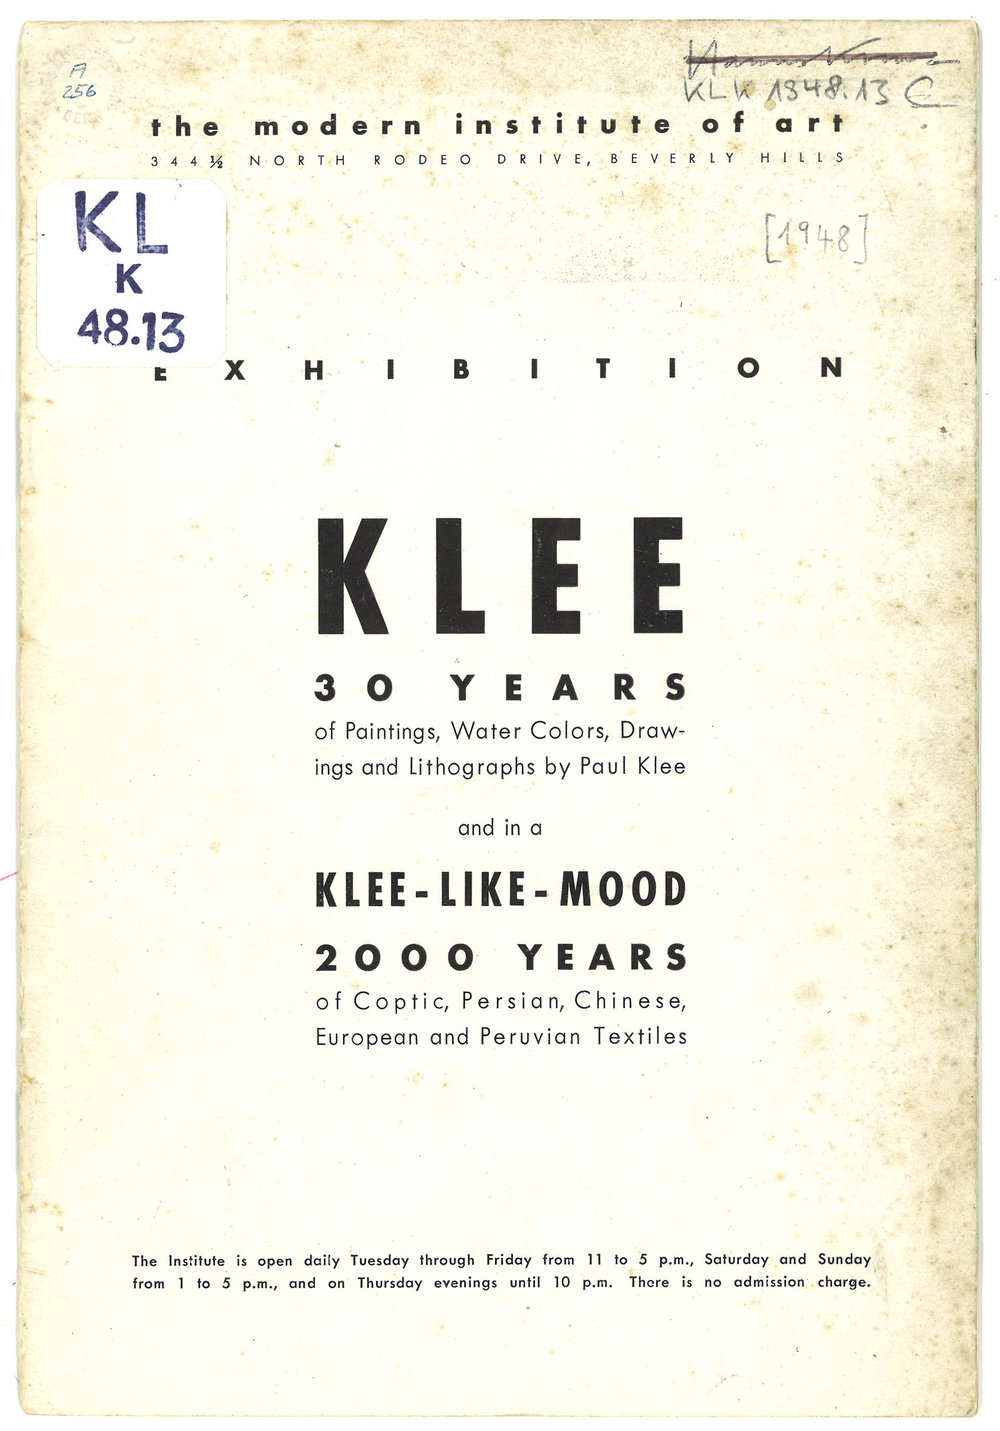 Abb 2 Klee 30 Years of Paintings Water Colors Drawings and Lithographs